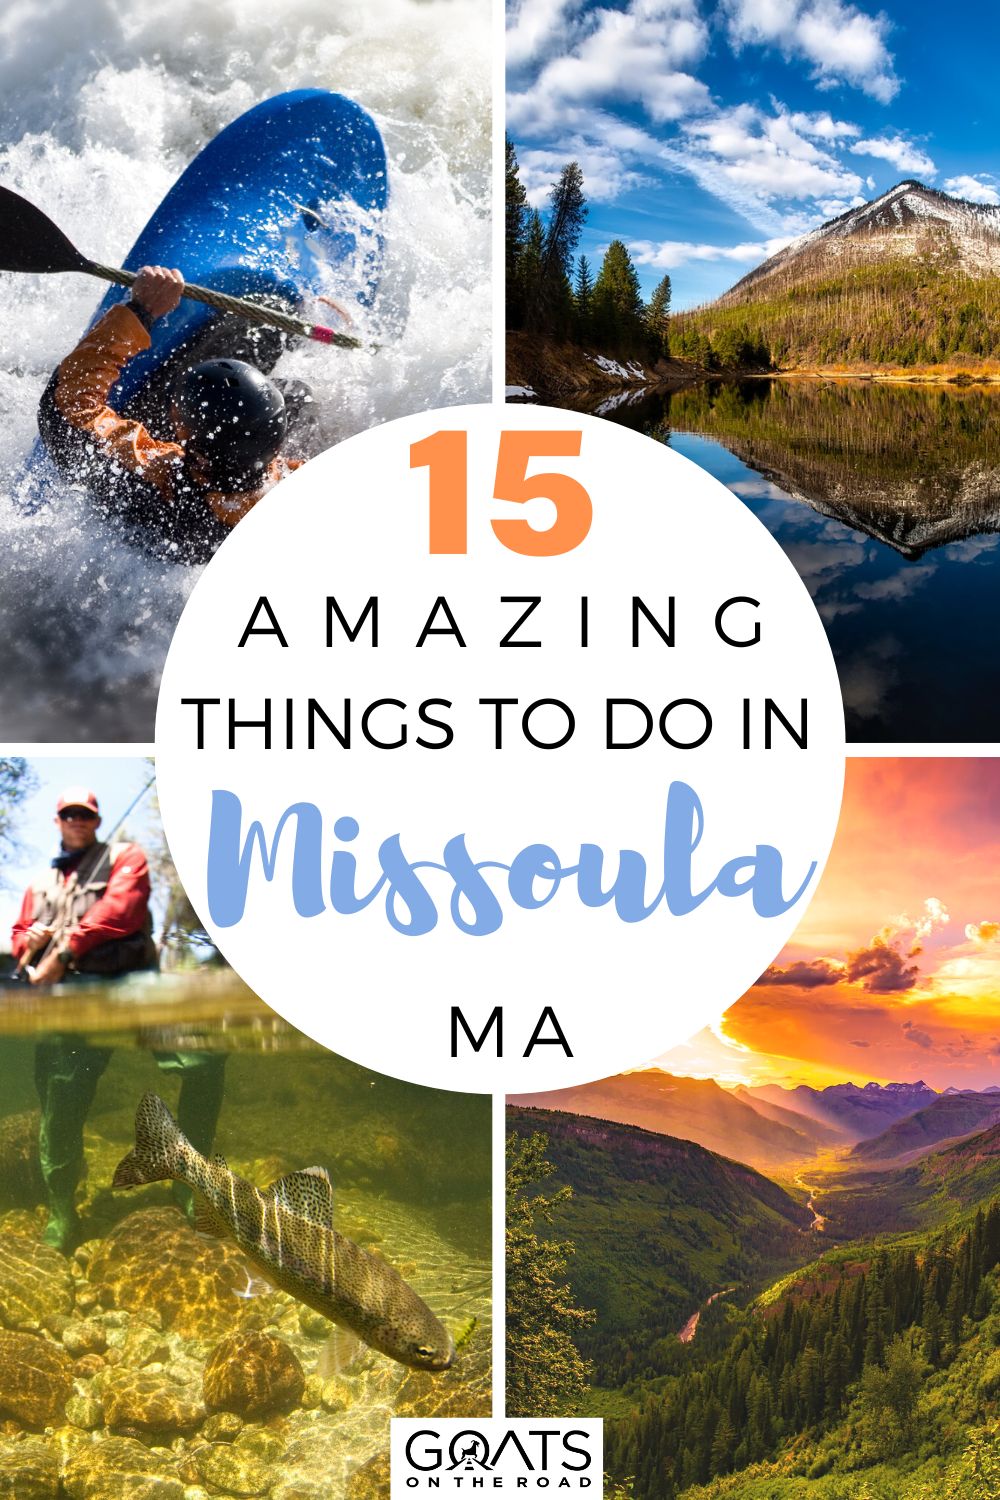 15 Best Things To Do in Missoula, MA